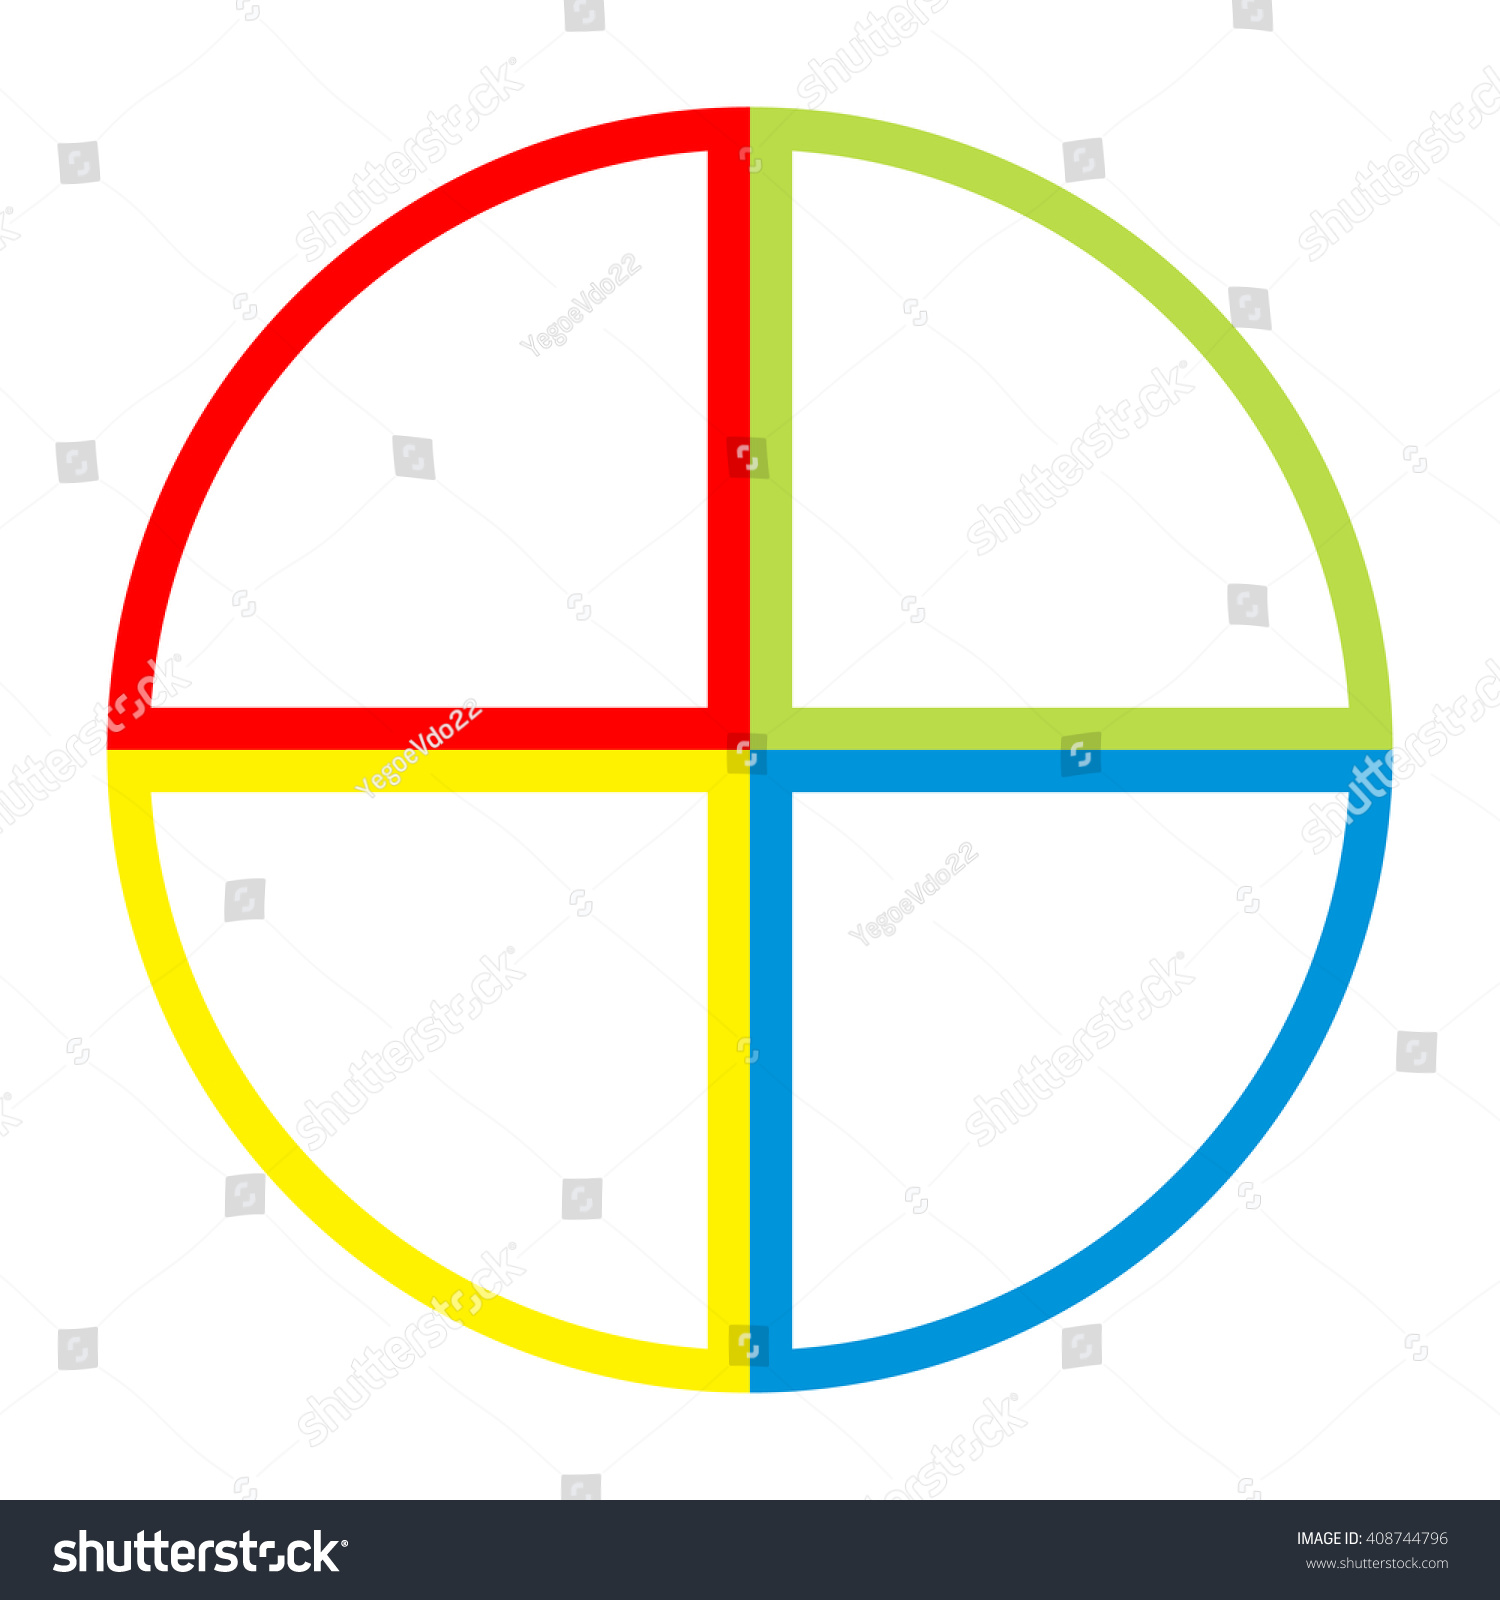 circle-divided-into-four-equal-parts